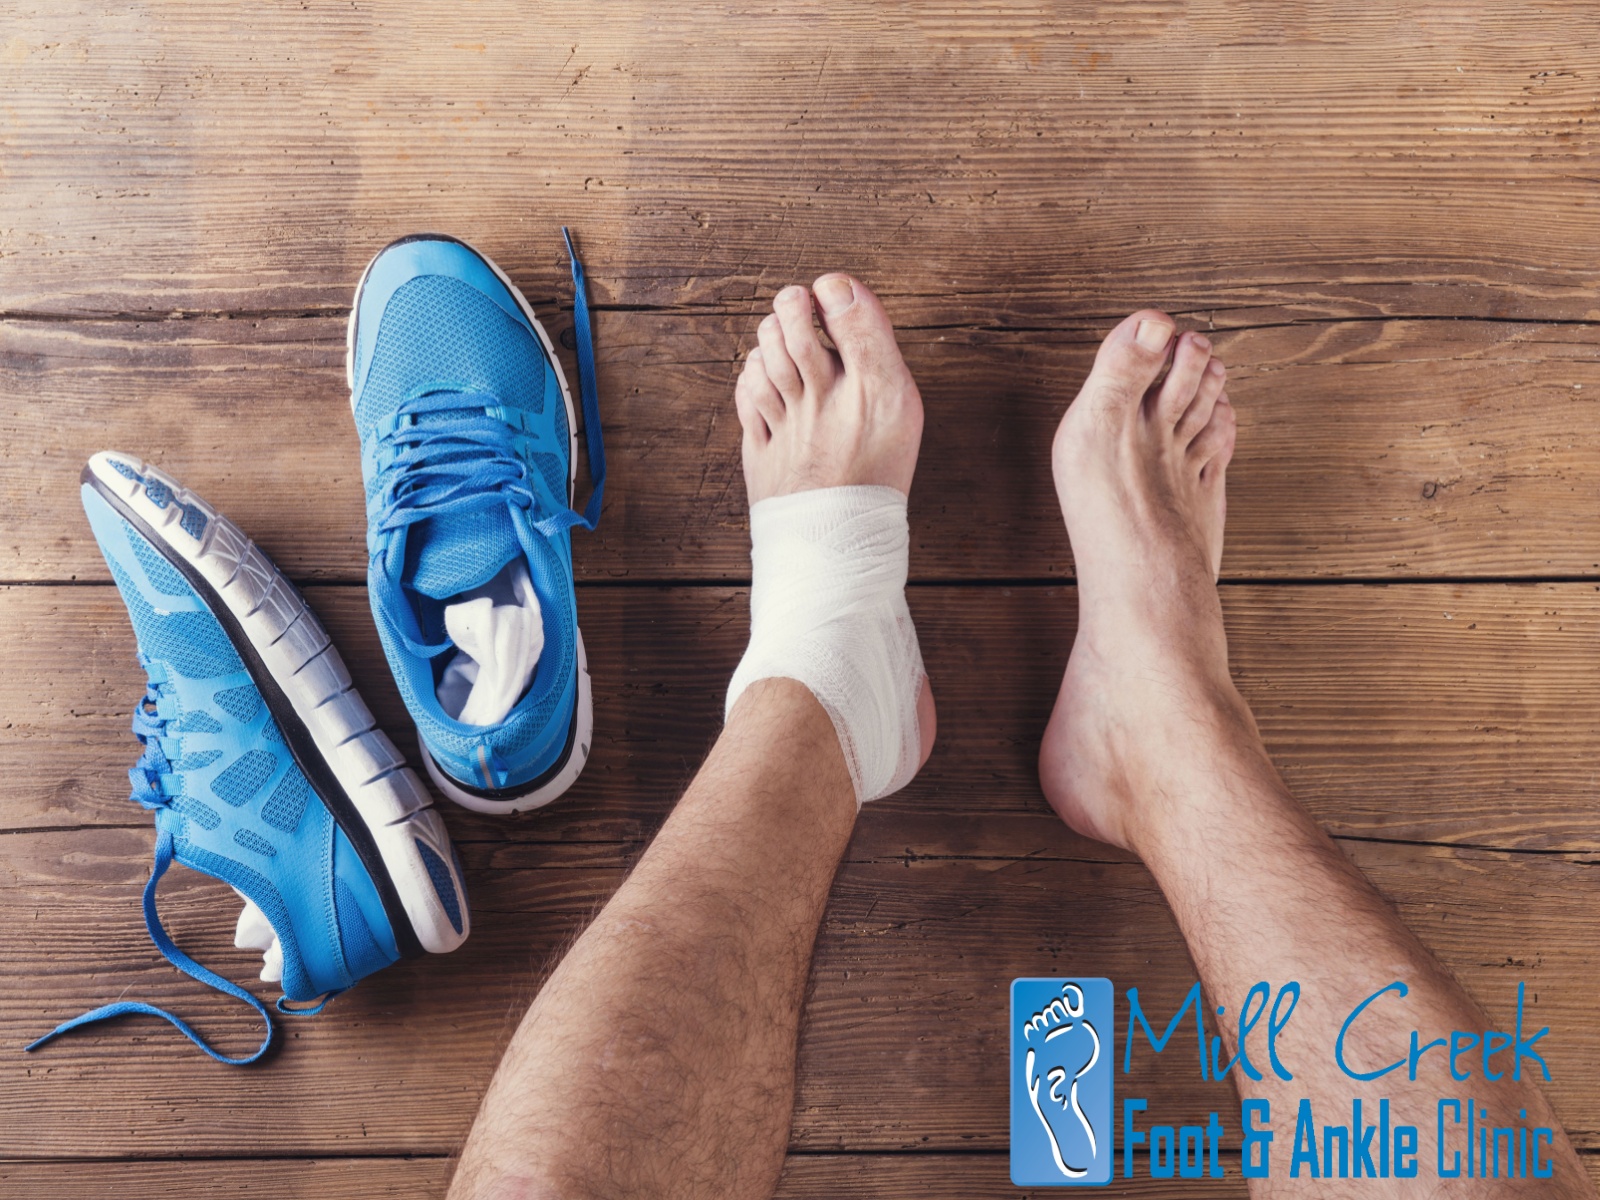 Twisted Ankle Troubles: Spotting Ankle Sprain Symptoms